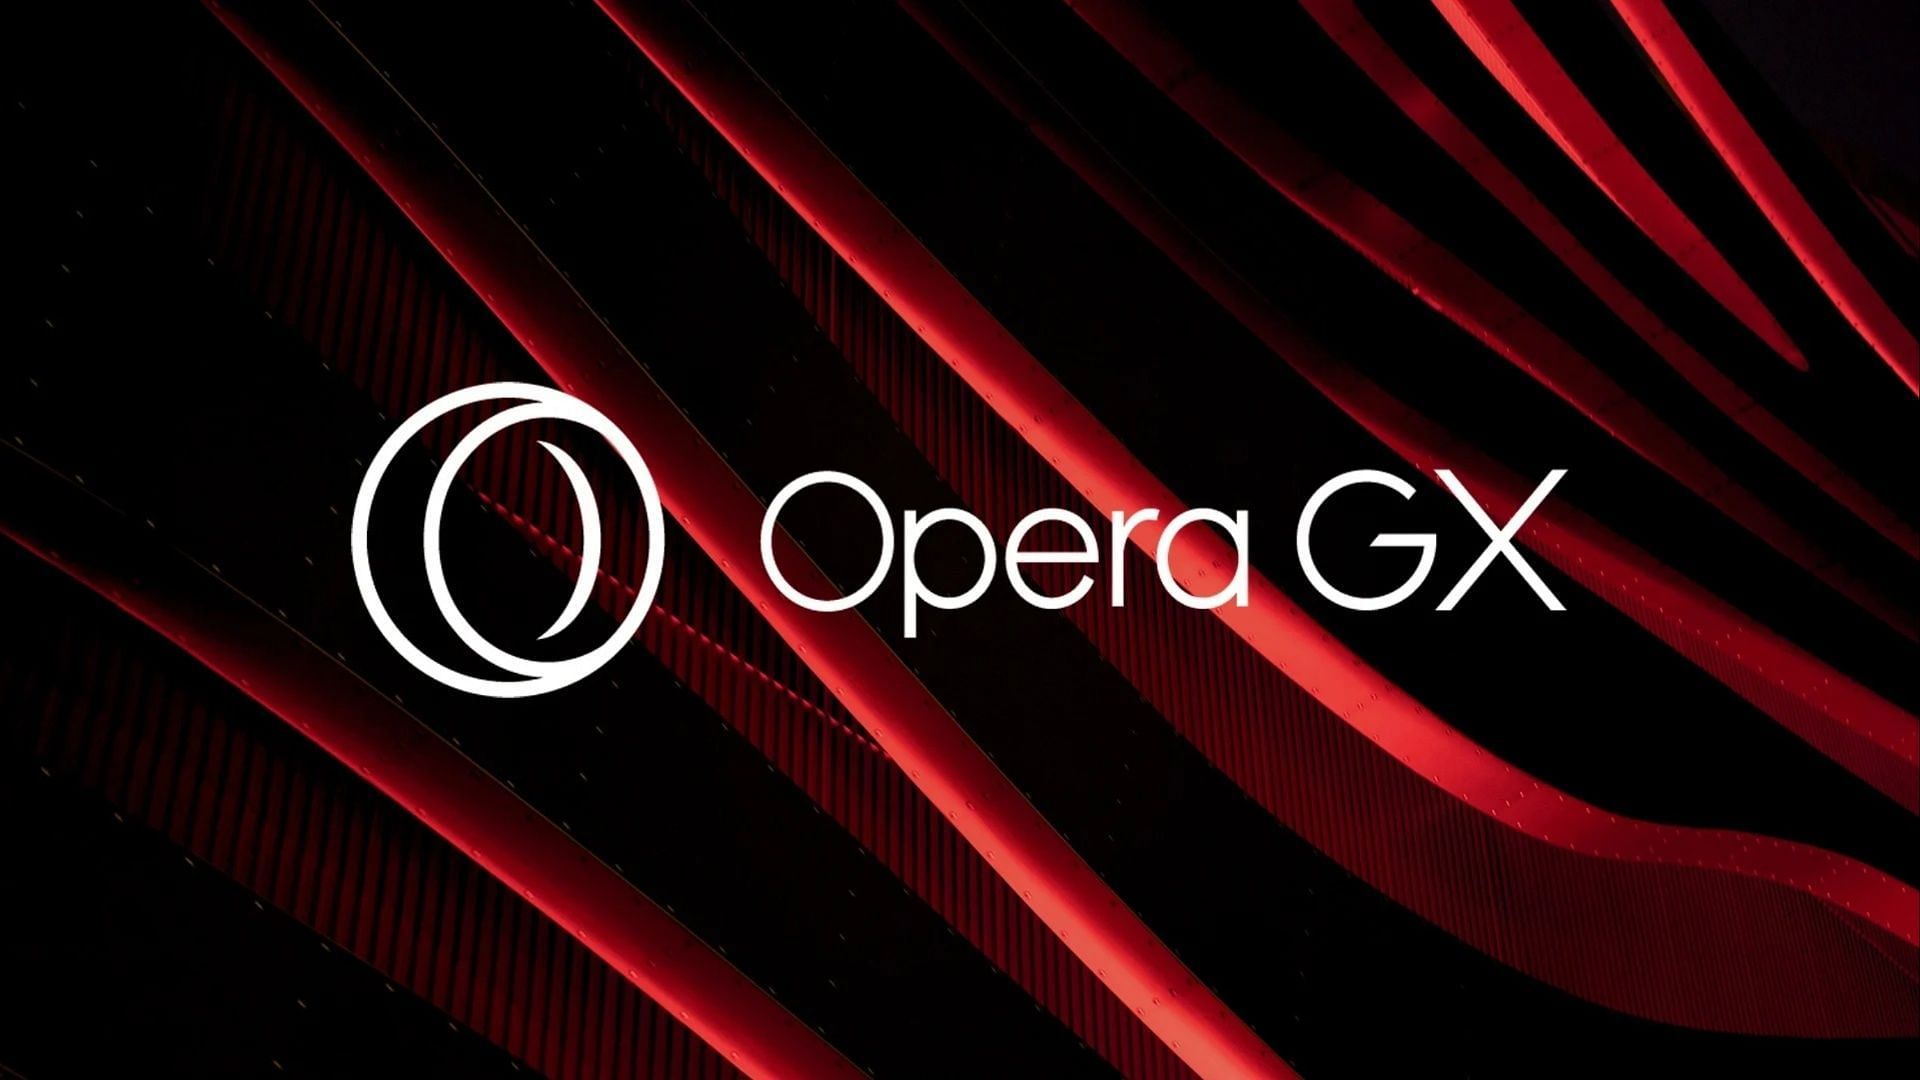 Opera GX: The browser for gaymers: Opera GX's Pride month logo leaves the  internet in a frenzy